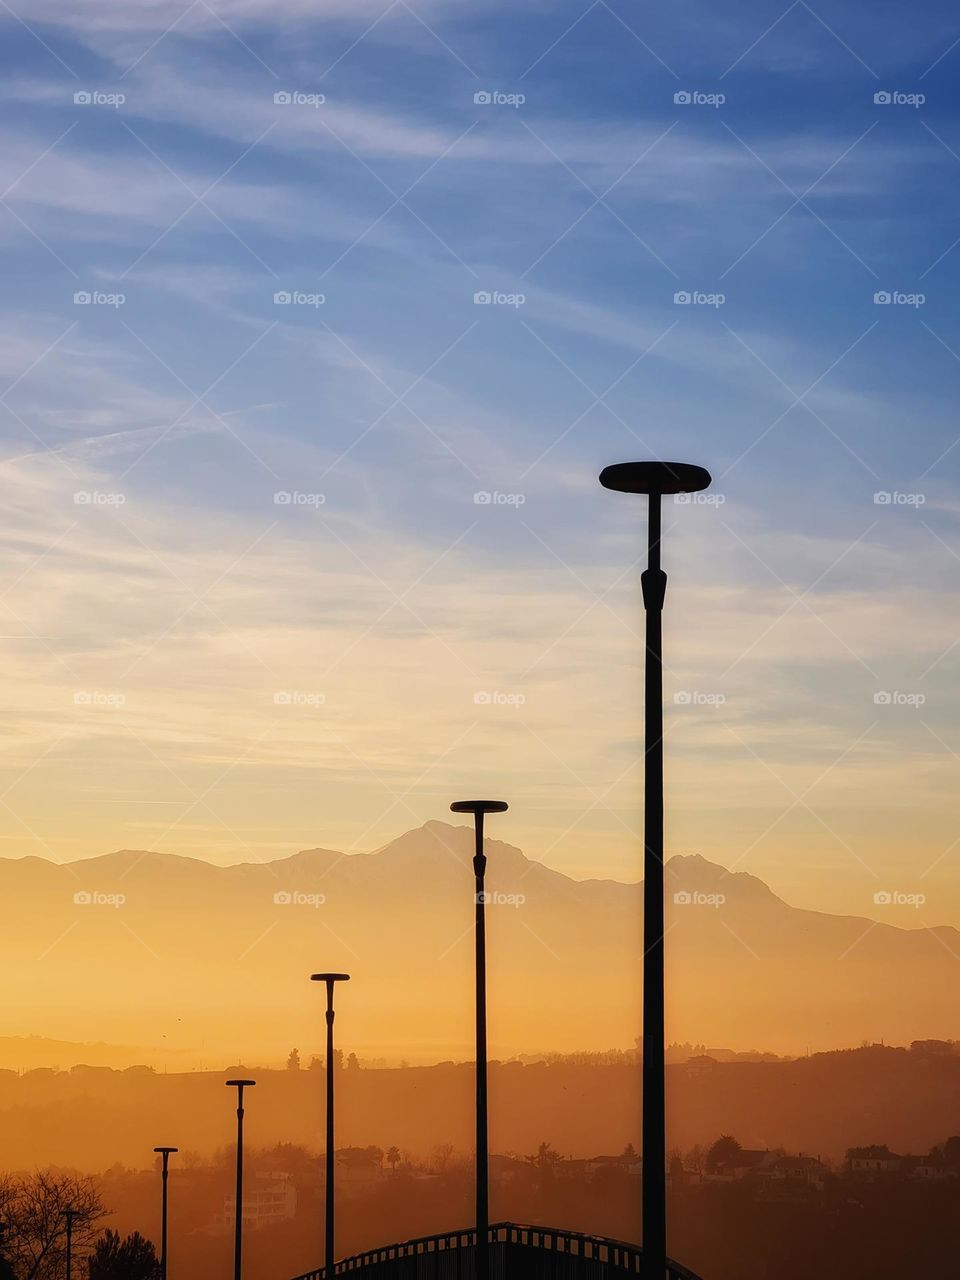 solar powered street lights lined up in a row